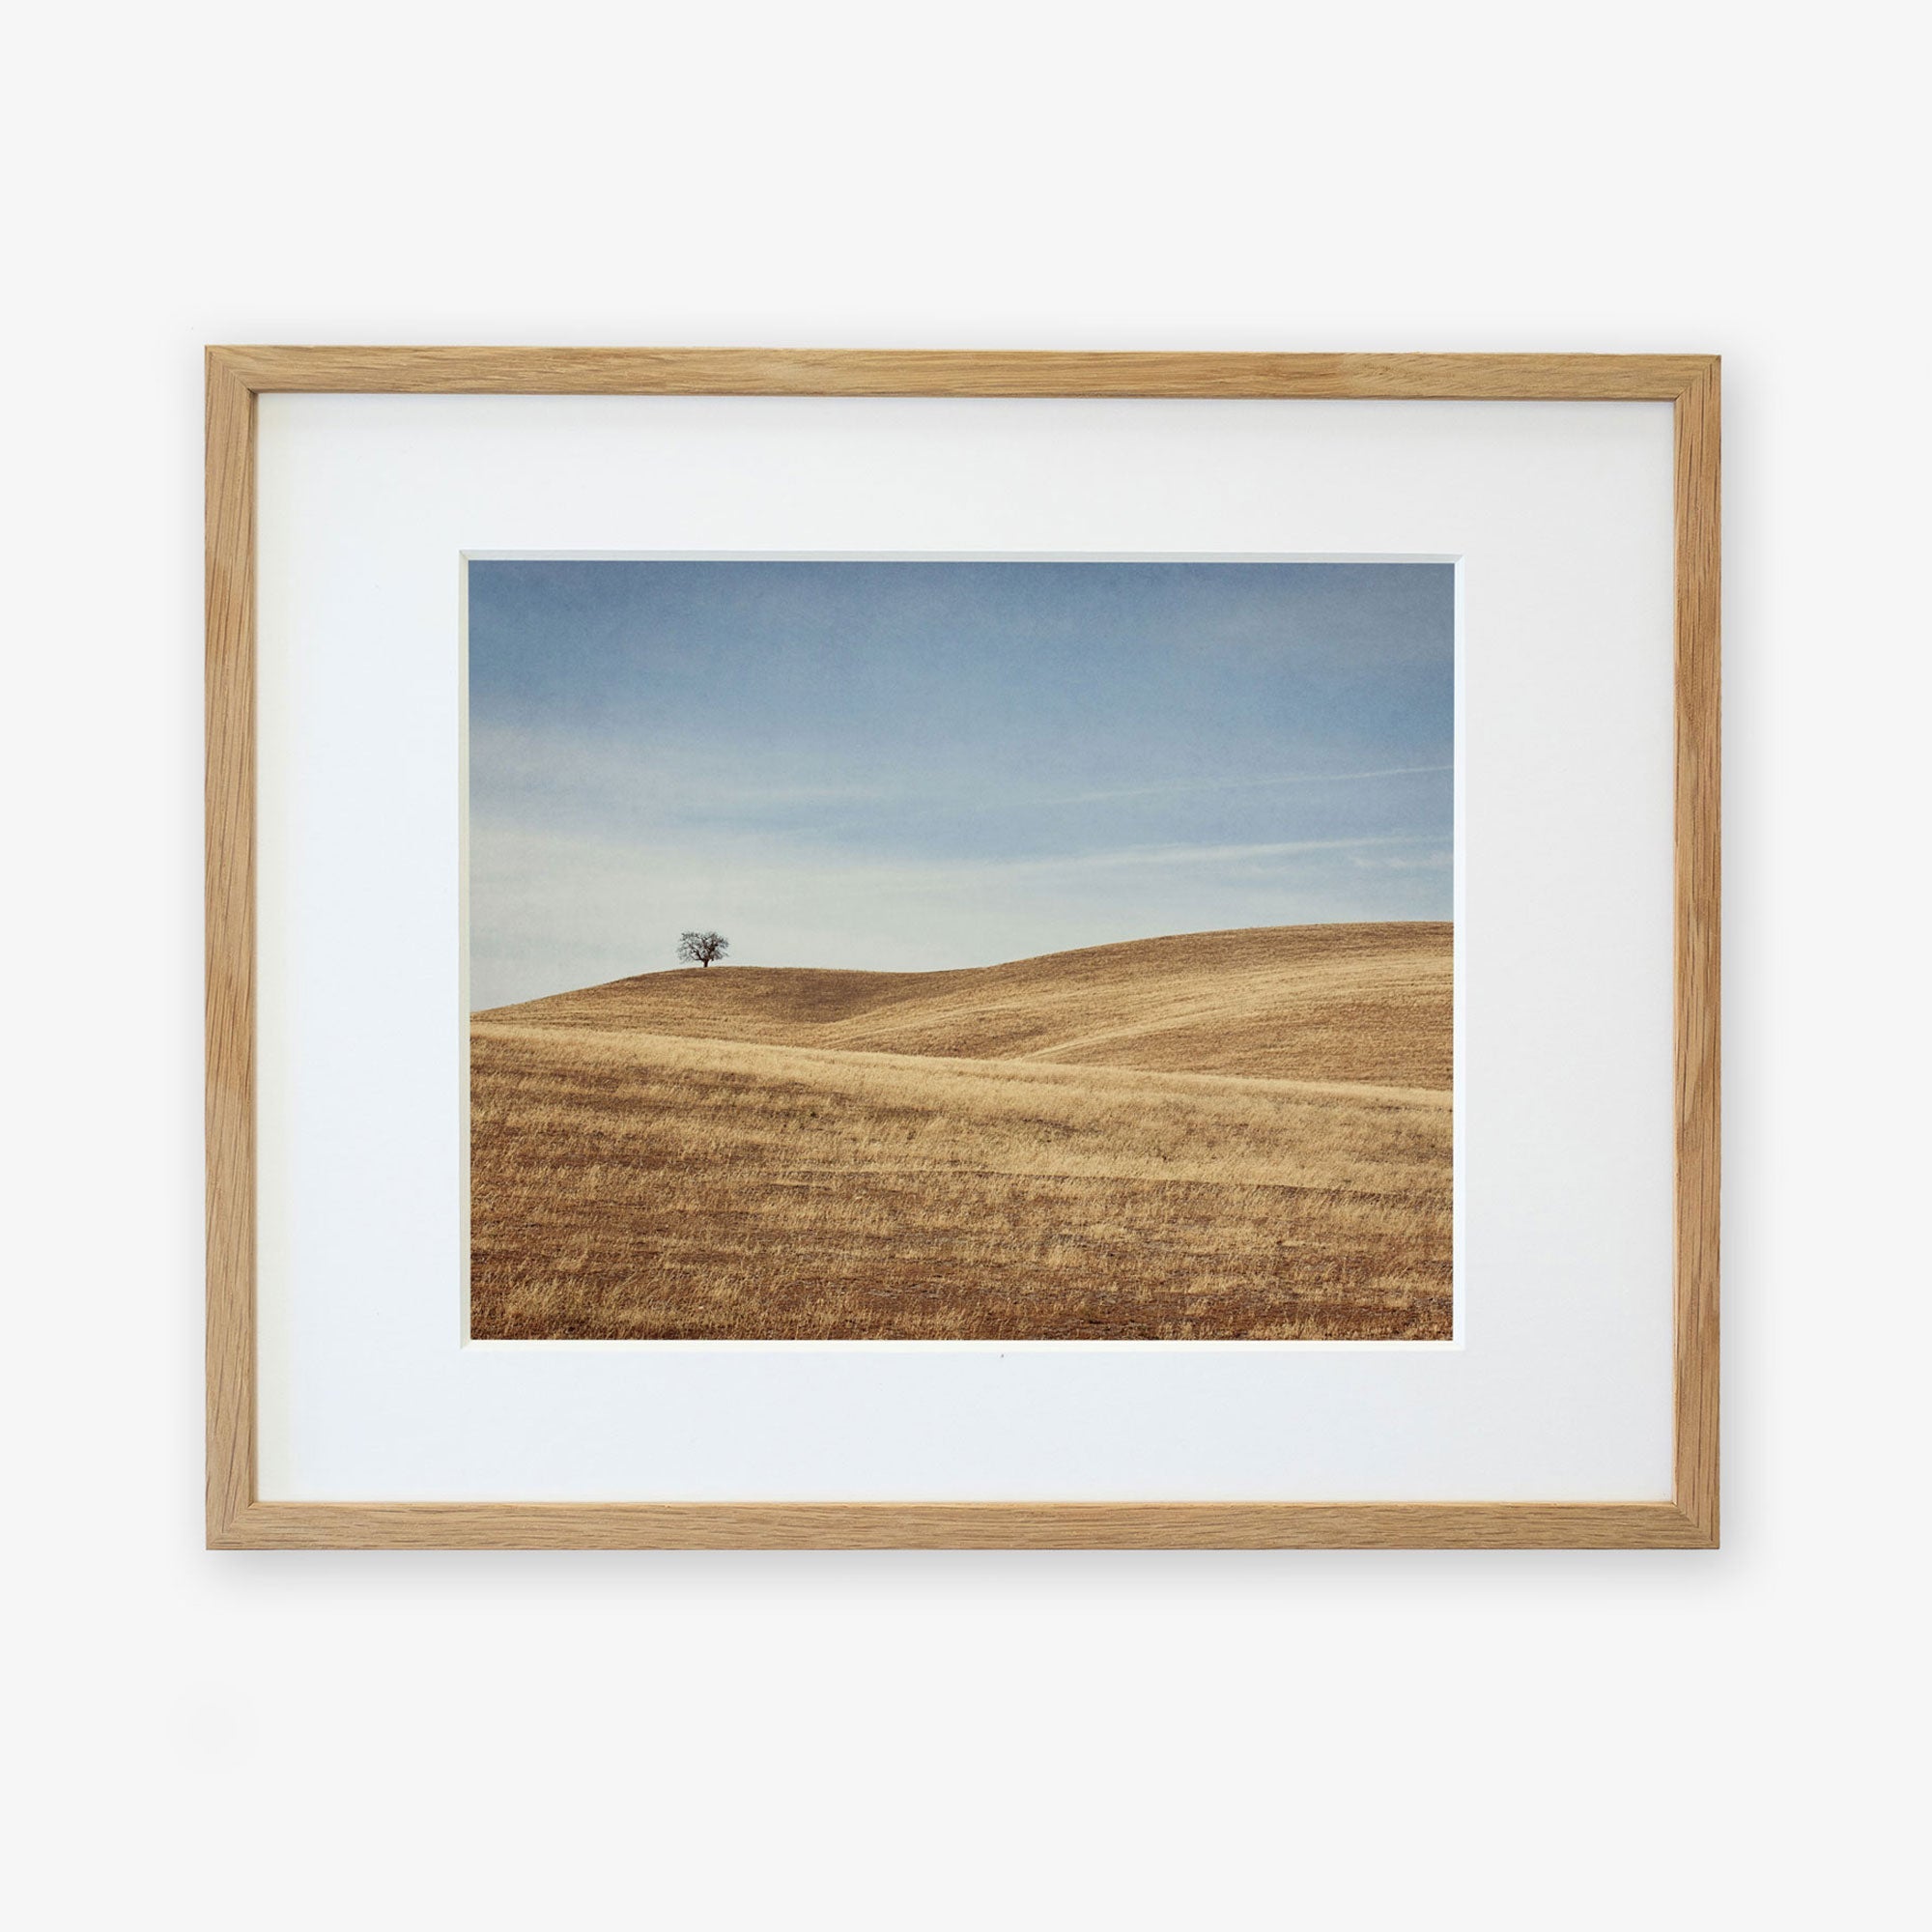 A framed photograph of a serene landscape featuring rolling golden hills and a solitary tree in the Santa Ynez Valley, displayed on a white background. This is the Offley Green California Central Coast Landscape Print 'Golden Ynez'.